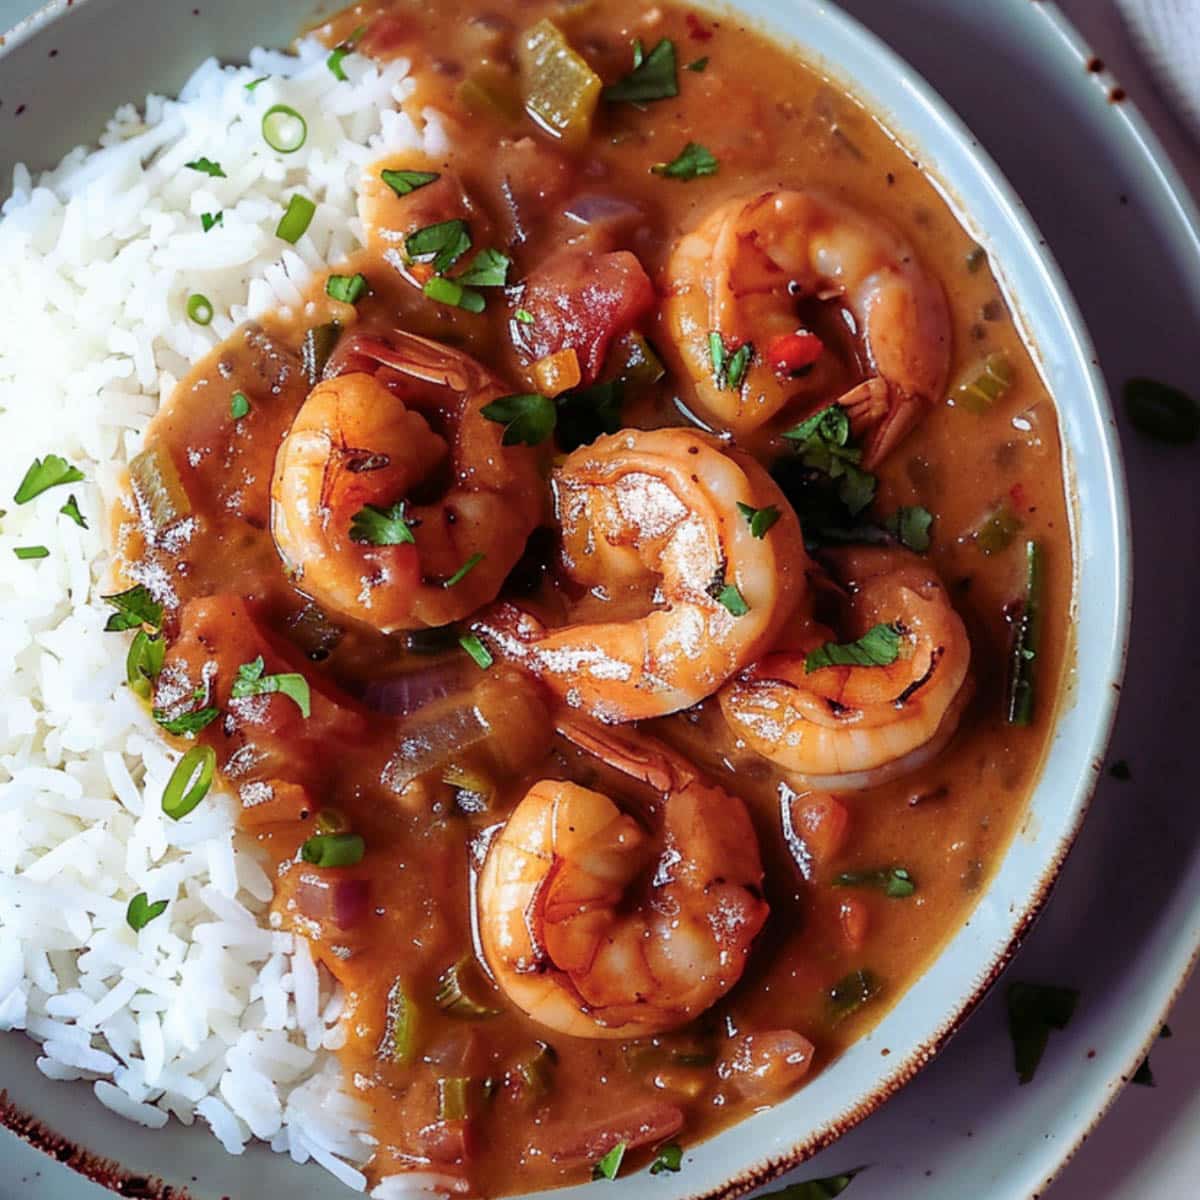 A close-up of Shrimp Étouffée in a plate, with juicy shrimp, a creamy roux, and green onions.